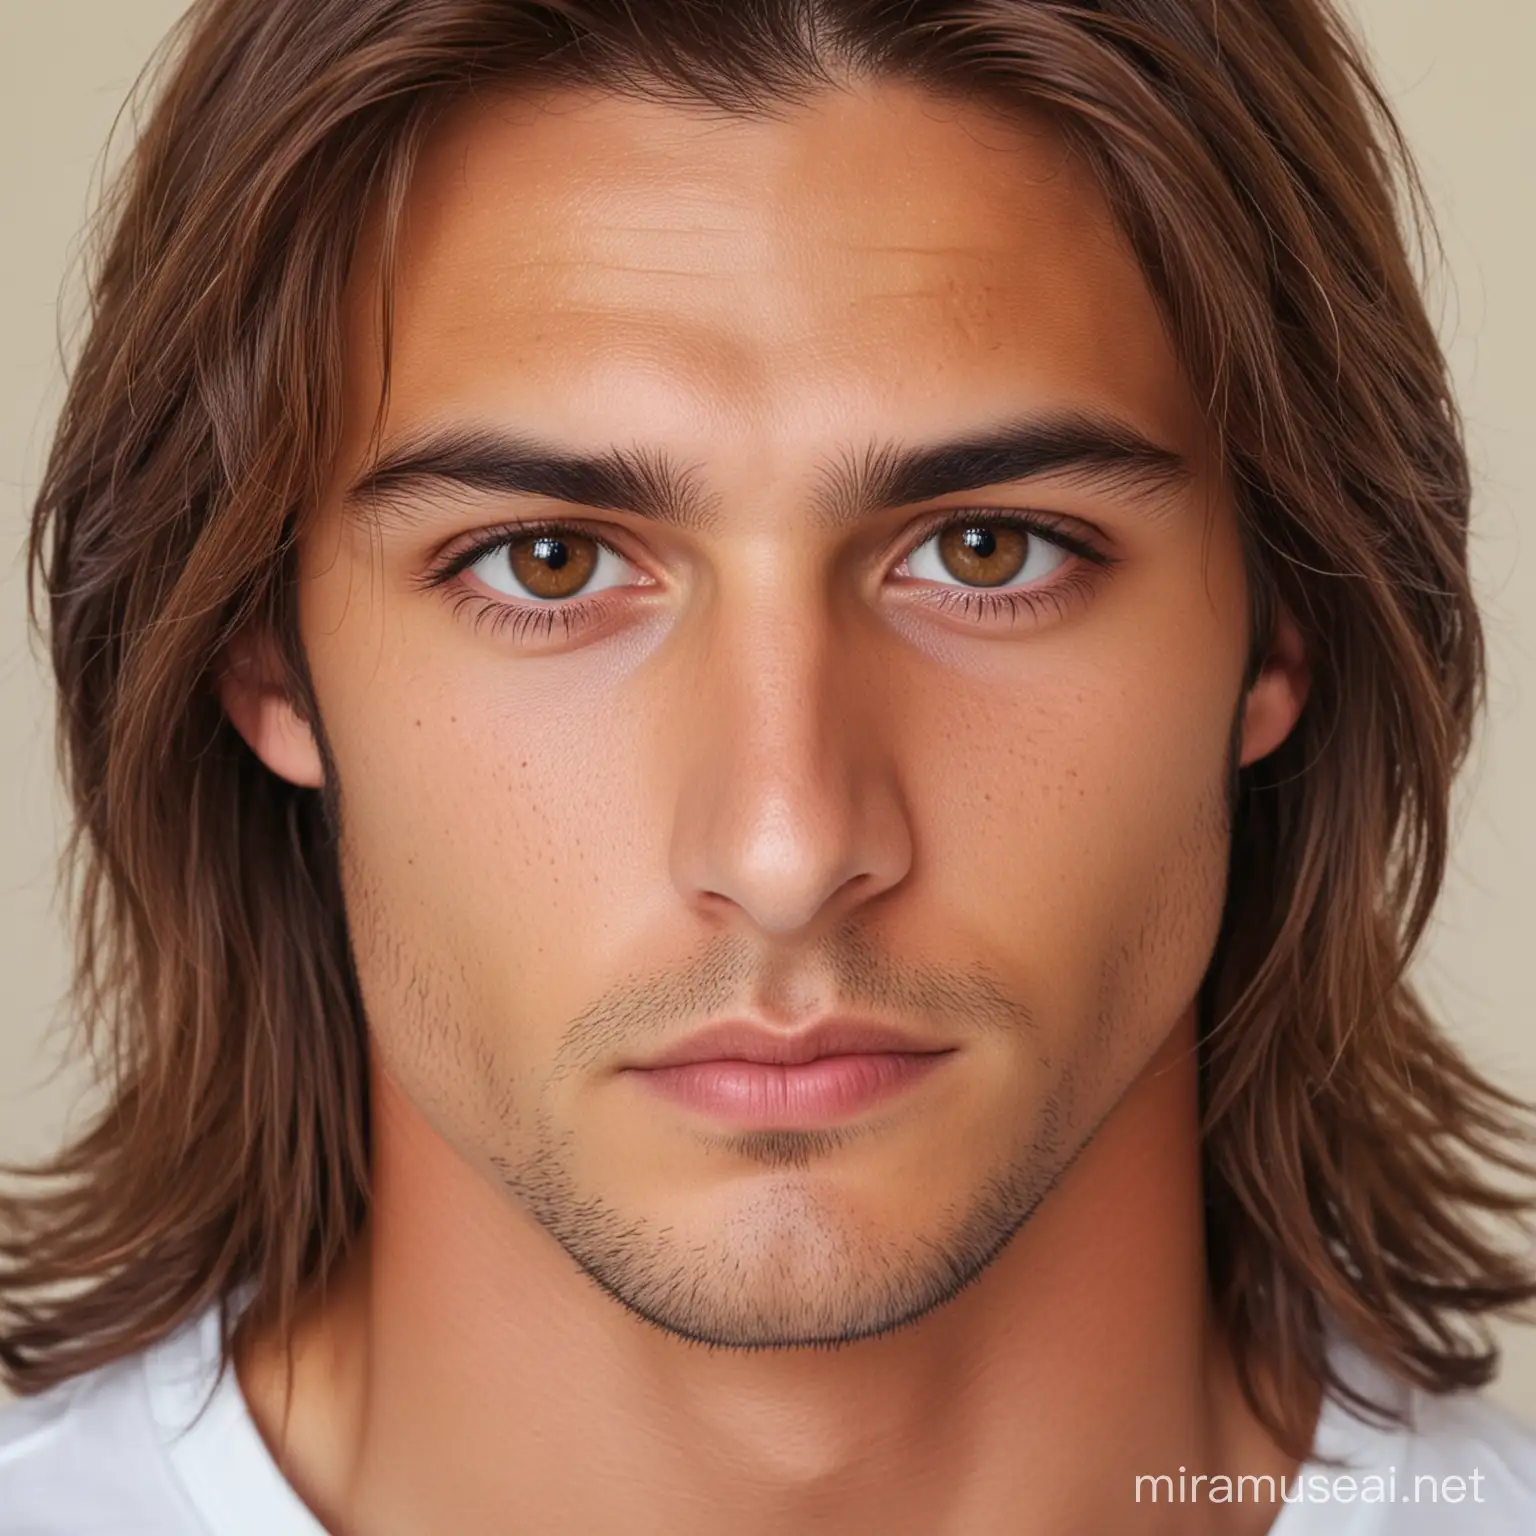 Young Man with Chestnut Hair and Brown Eyes